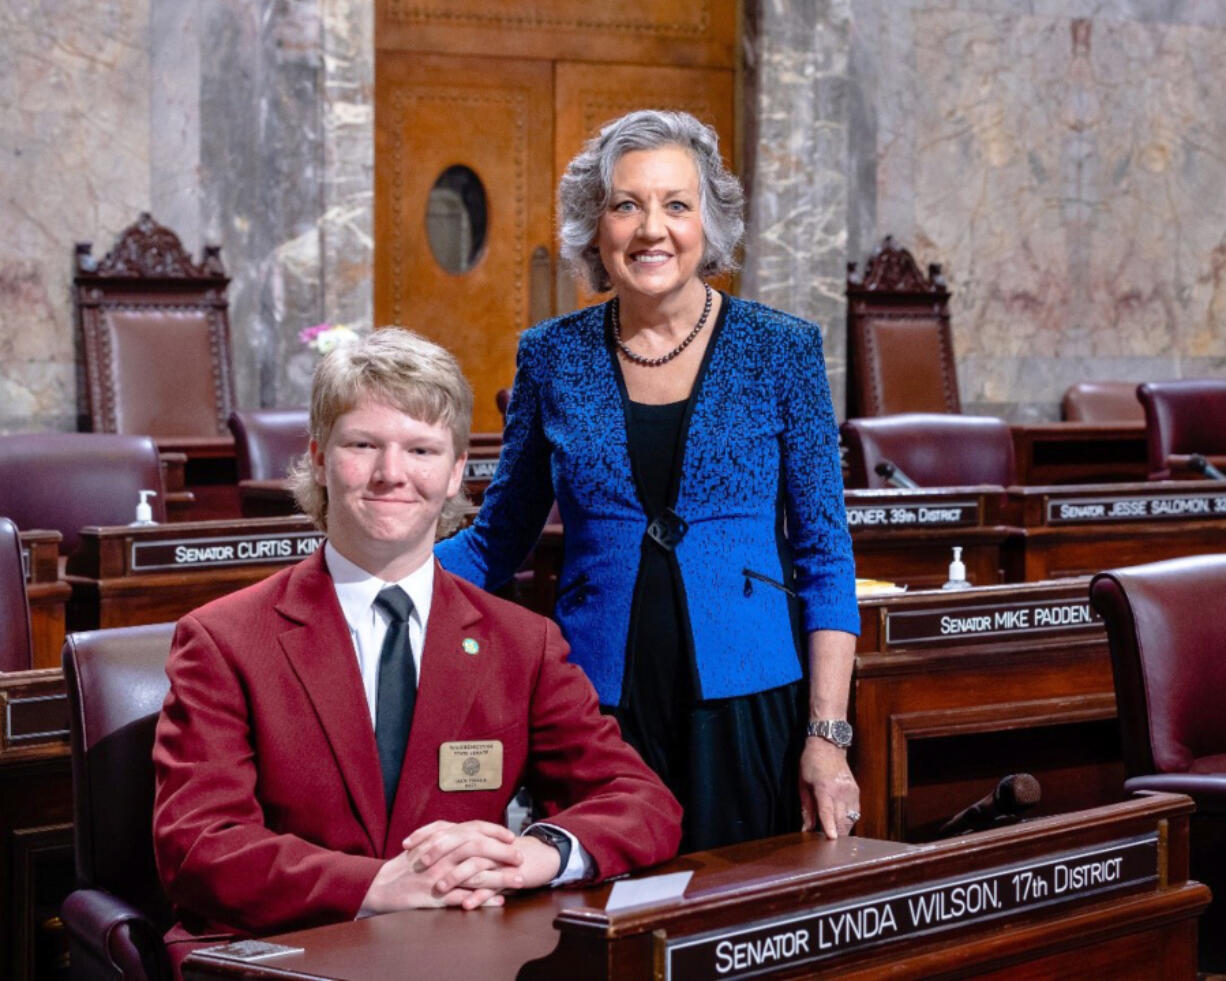 Jack Fisher, a freshman at King's Way Christian High School, served as a Senate page at the Washington Senate at the Capitol in Olympia the week of March 6-10.